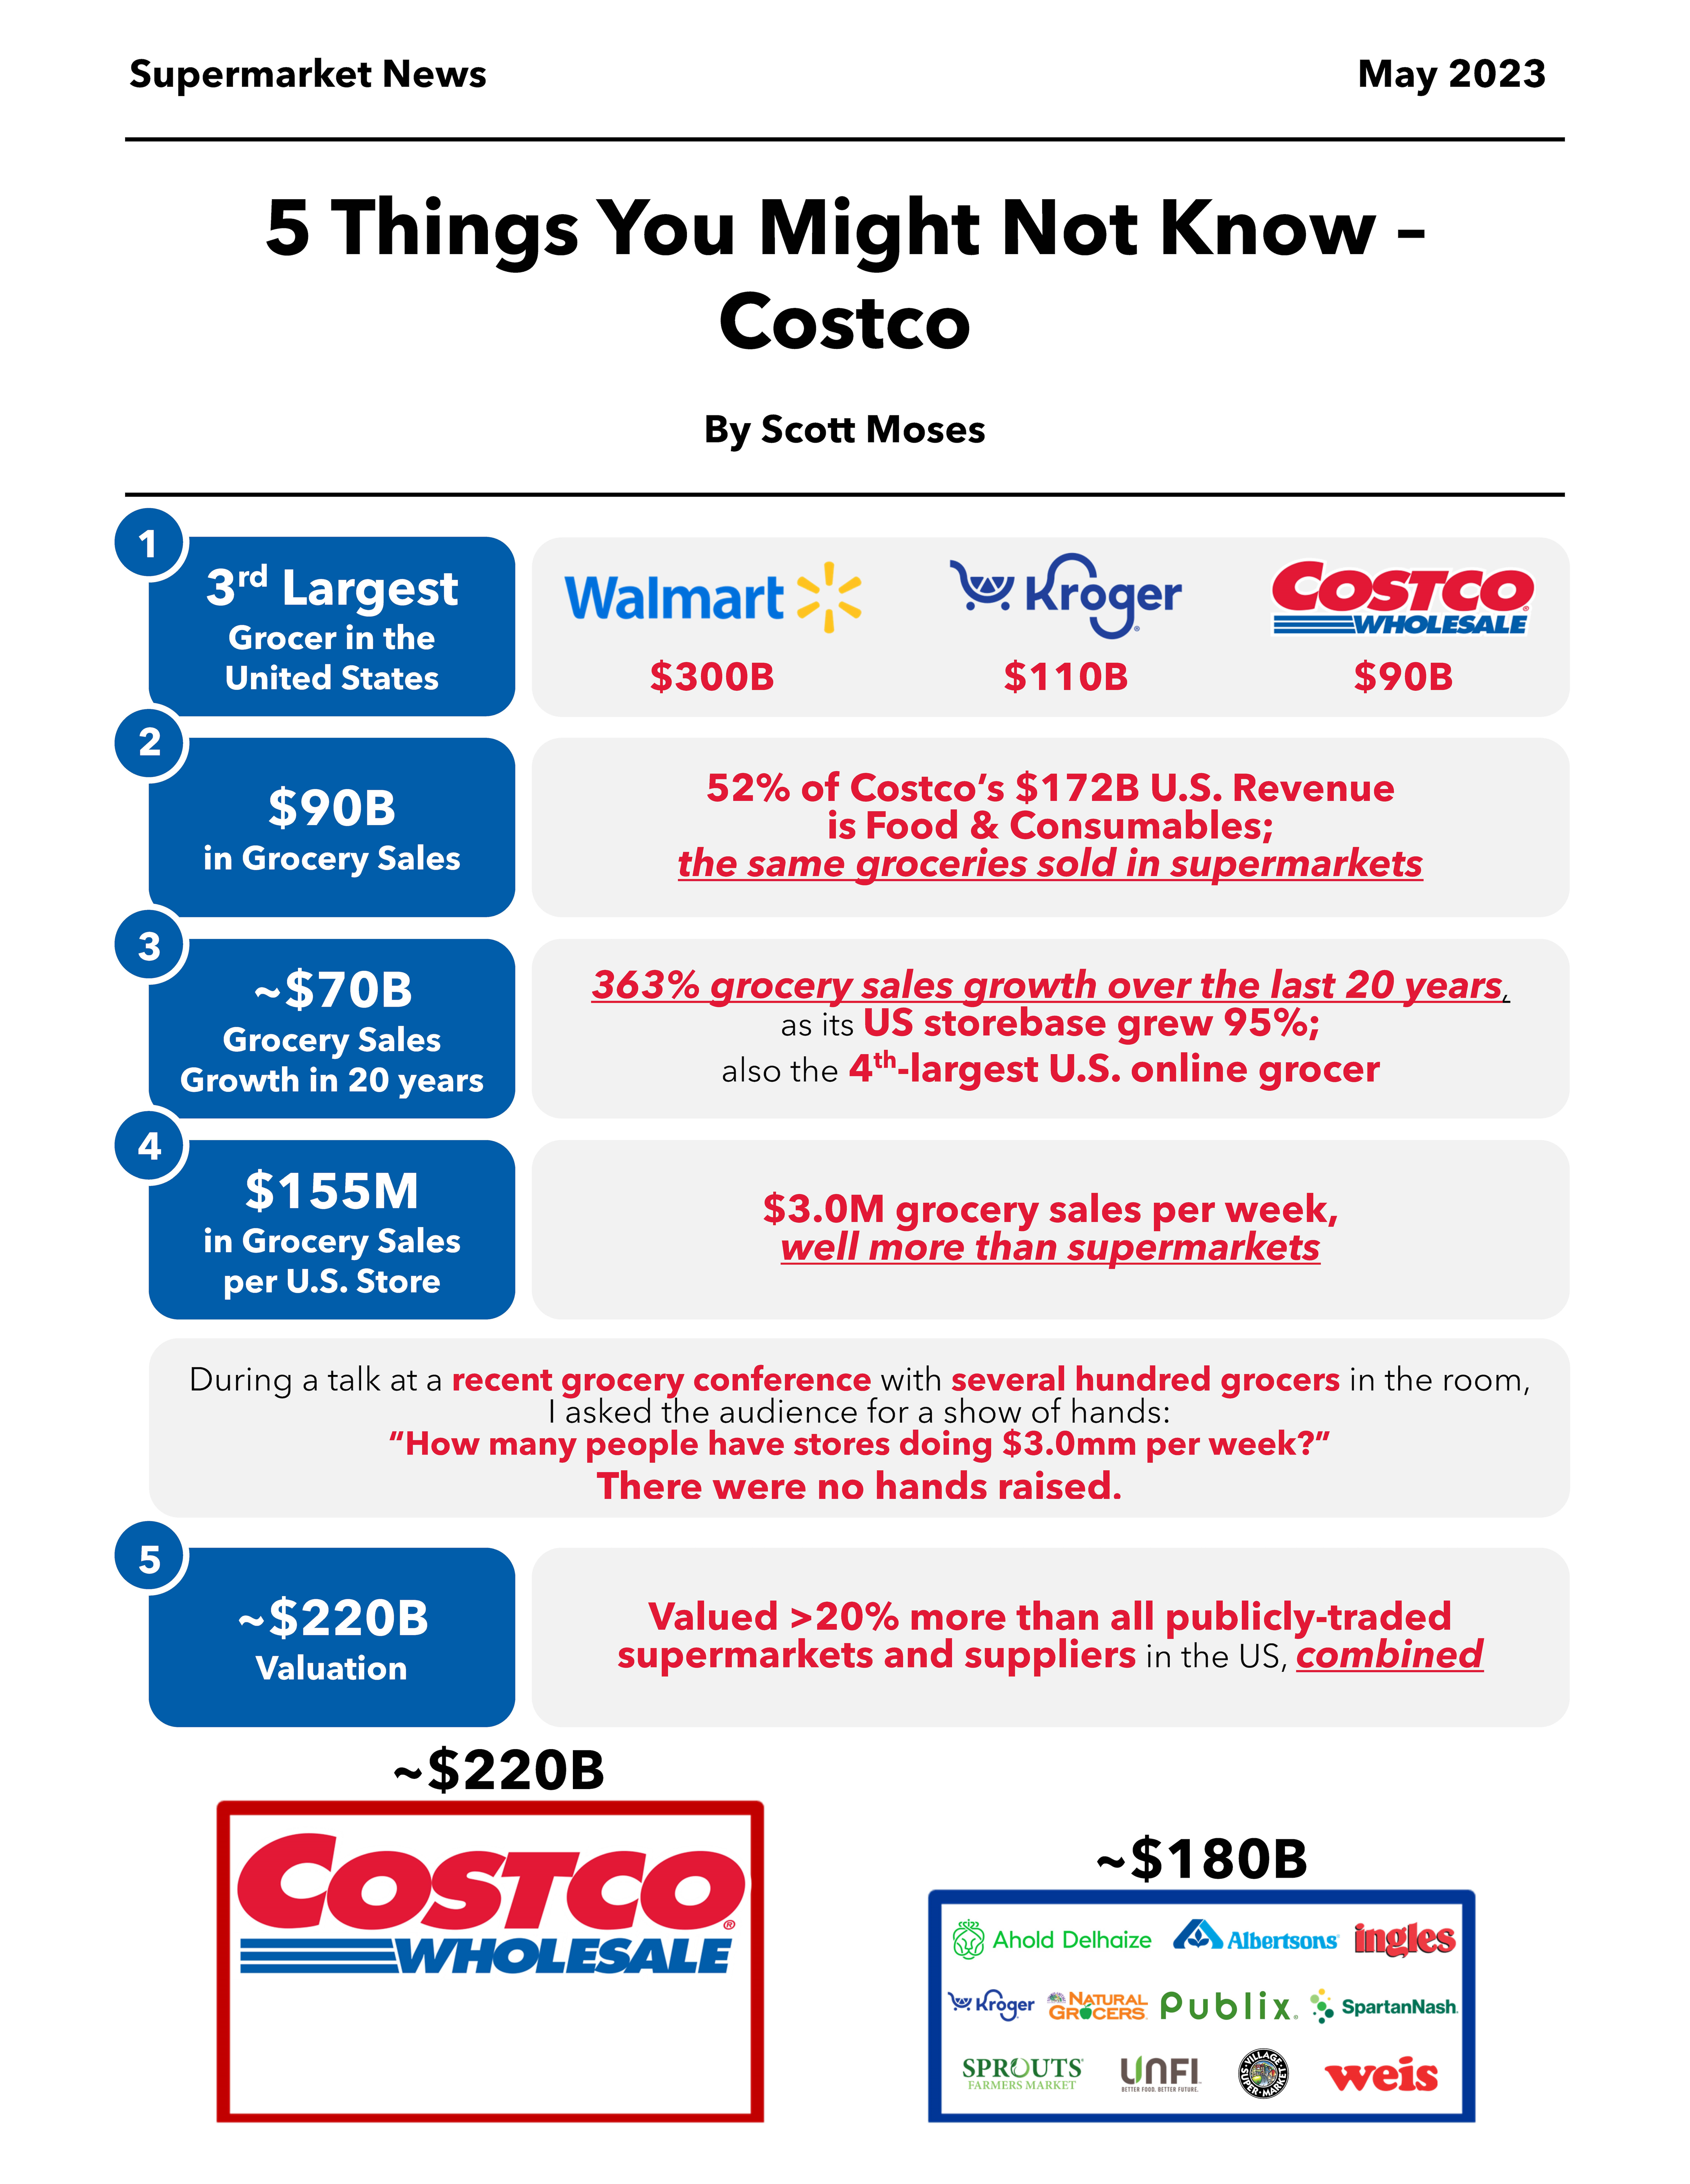 Scott Moses - Supermarket News - 5 Things You May Not Know - Costco 2023-05.png